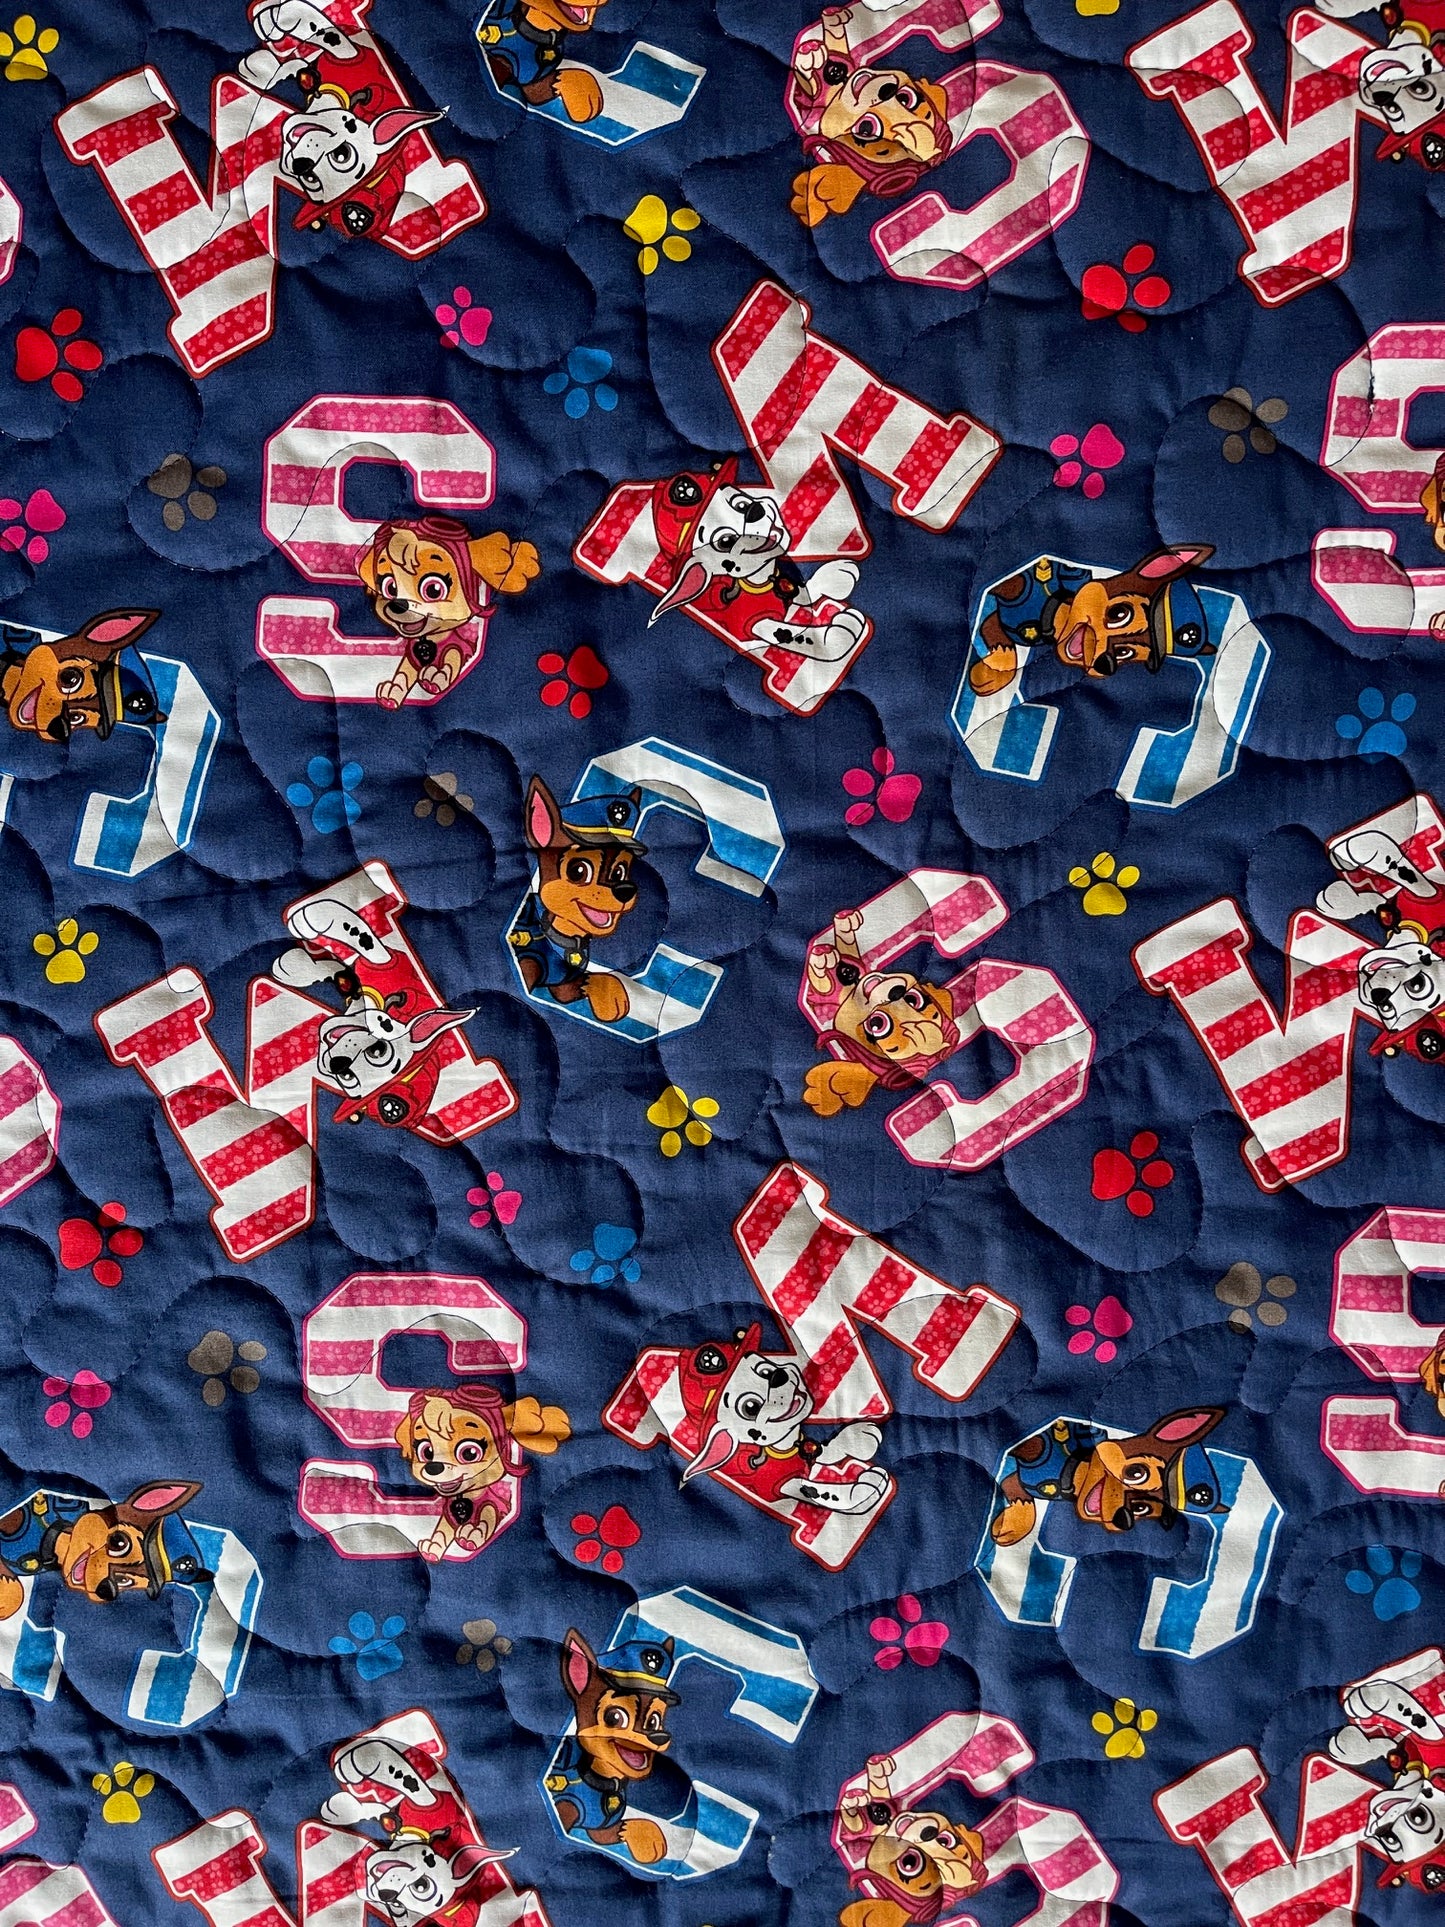 PAW PATROL MARSHALL, CHASE, RUBBLE & SKYE Inspired 36"x44" REVERSIBLE Quilted Blanket